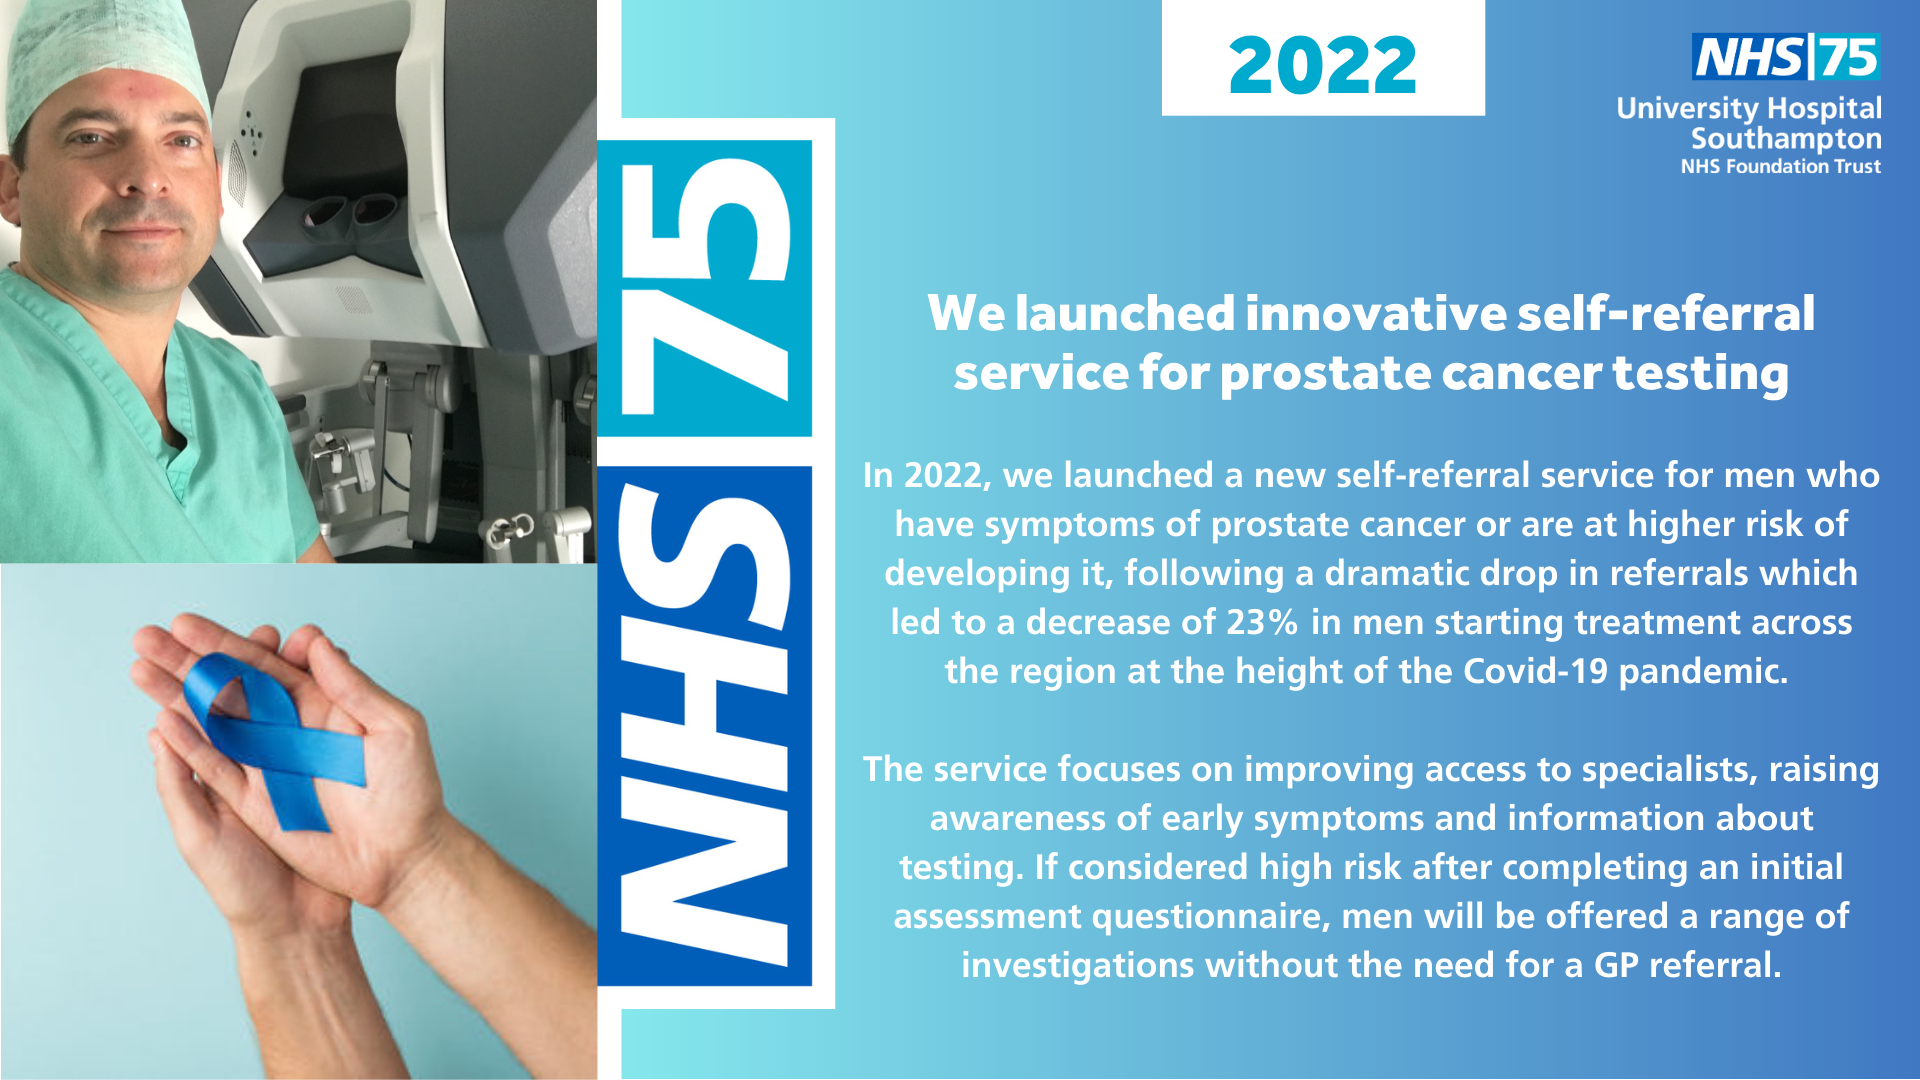 We launched innovative self-referral service for prostate cancer testing